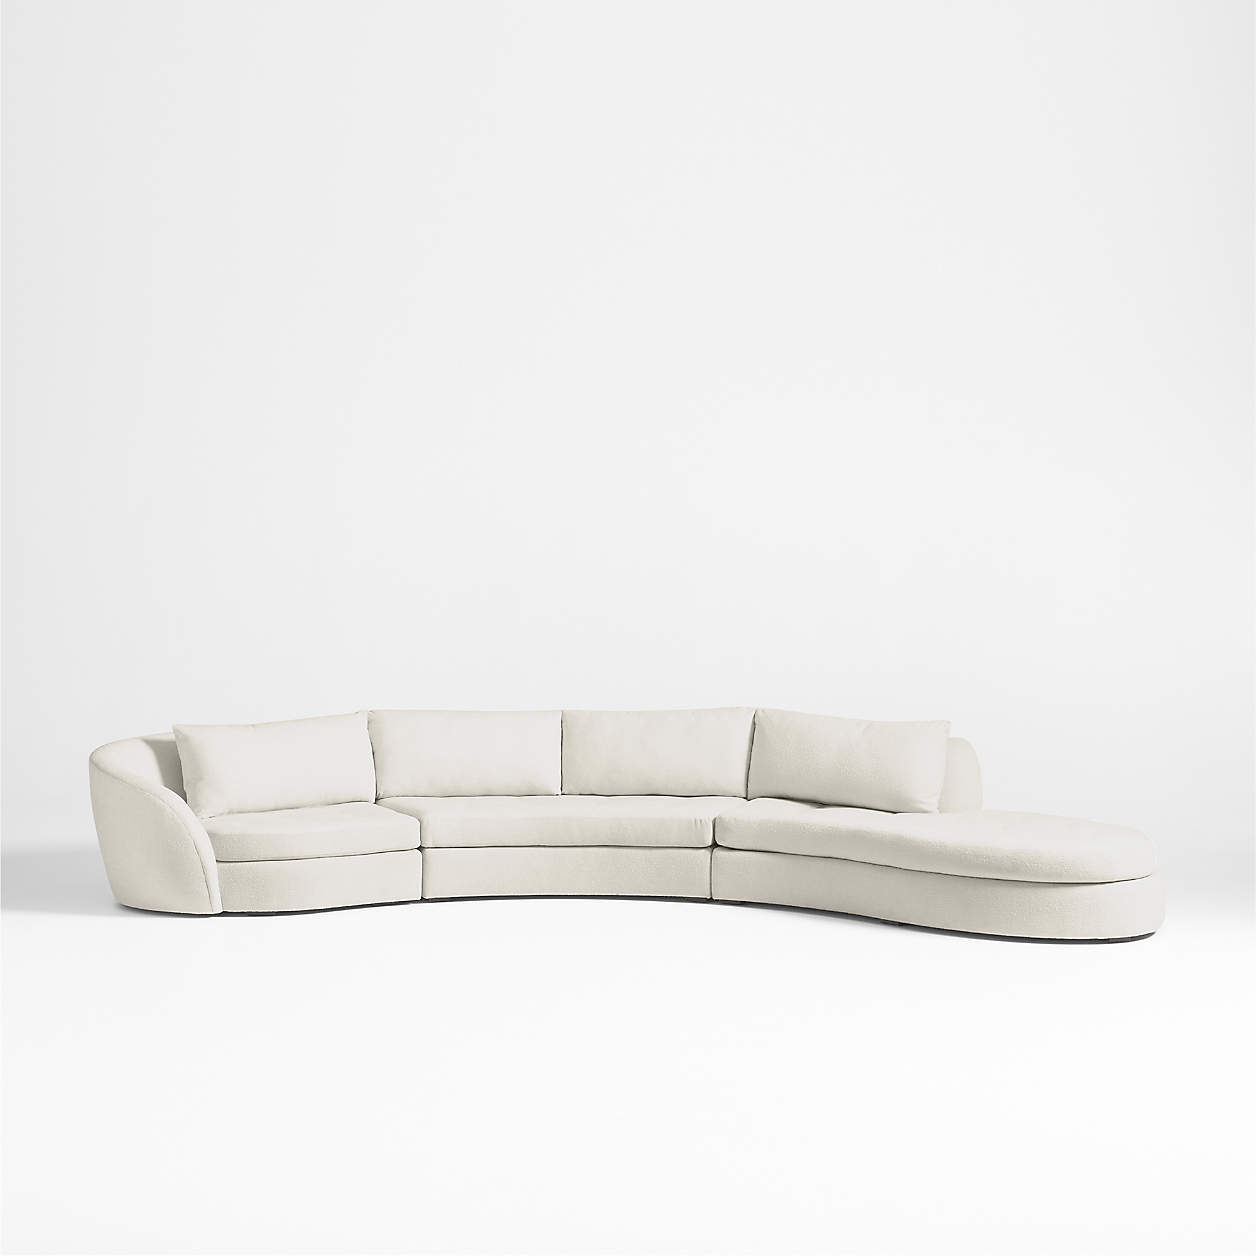 Sinuous Curved 3 Piece Right Arm Chaise Sectional Sofa By Athena Calderone 